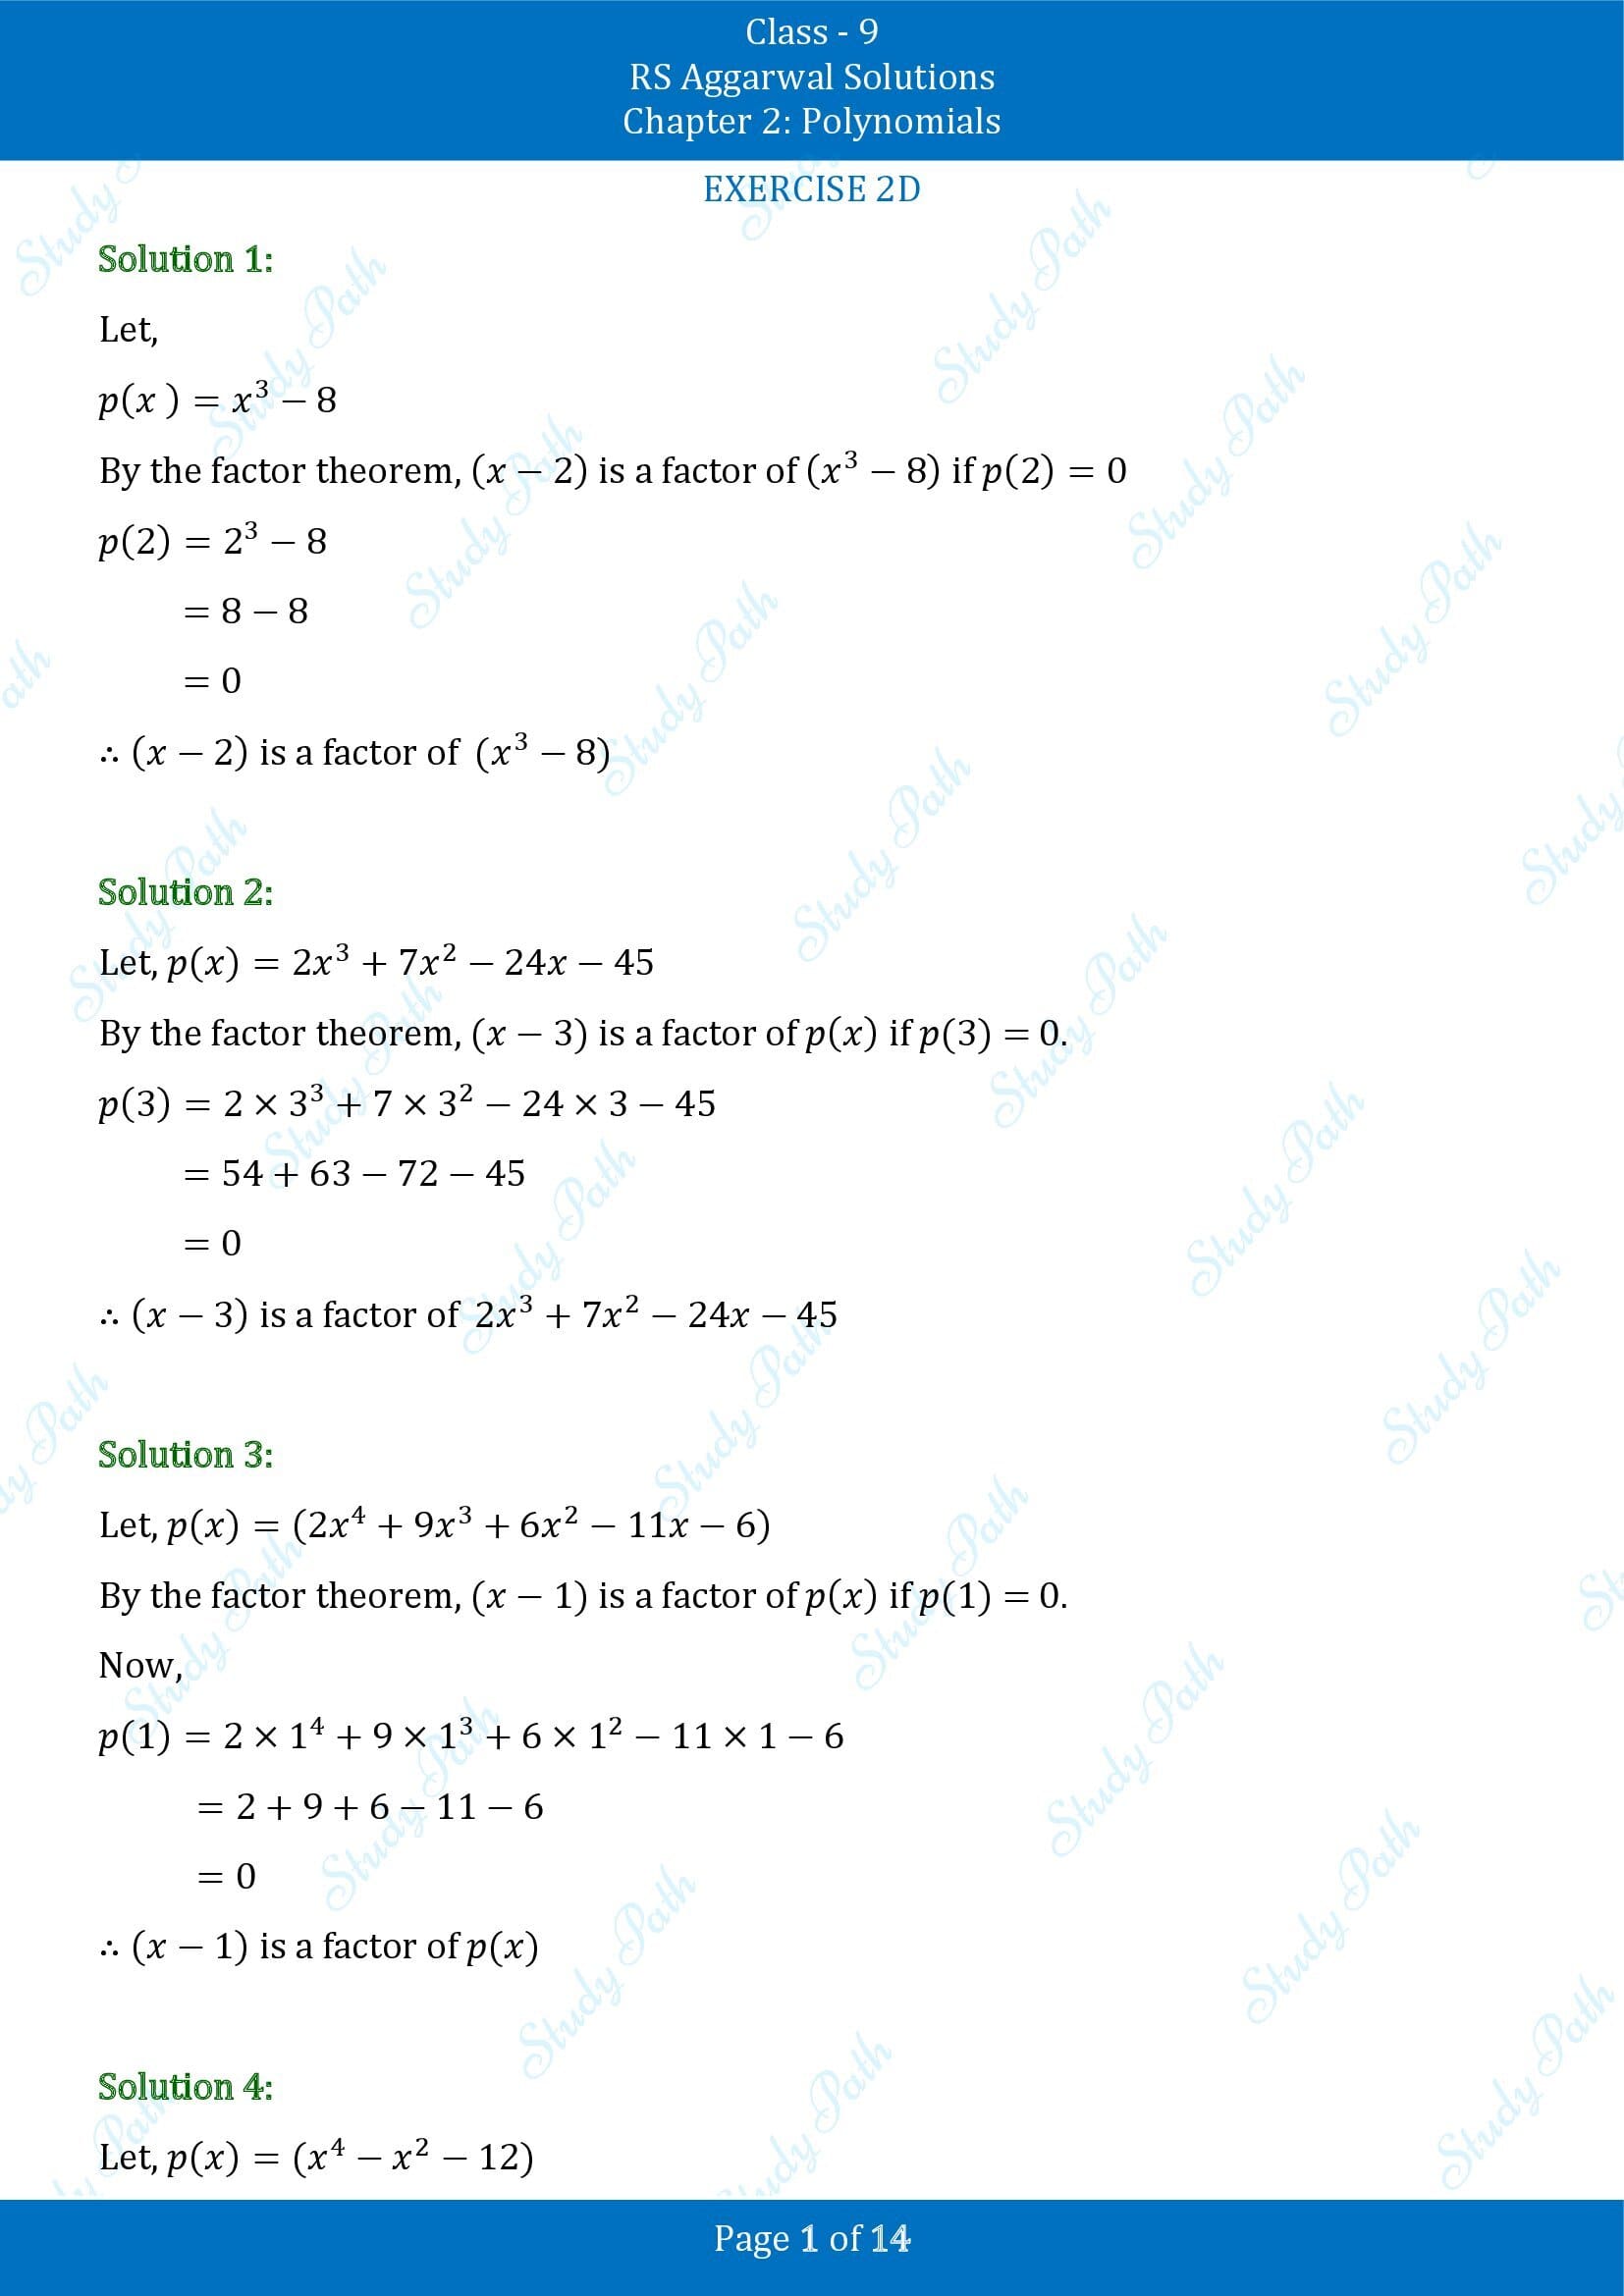 RS Aggarwal Solutions Class 9 Chapter 2 Polynomials Exercise 2D 00001